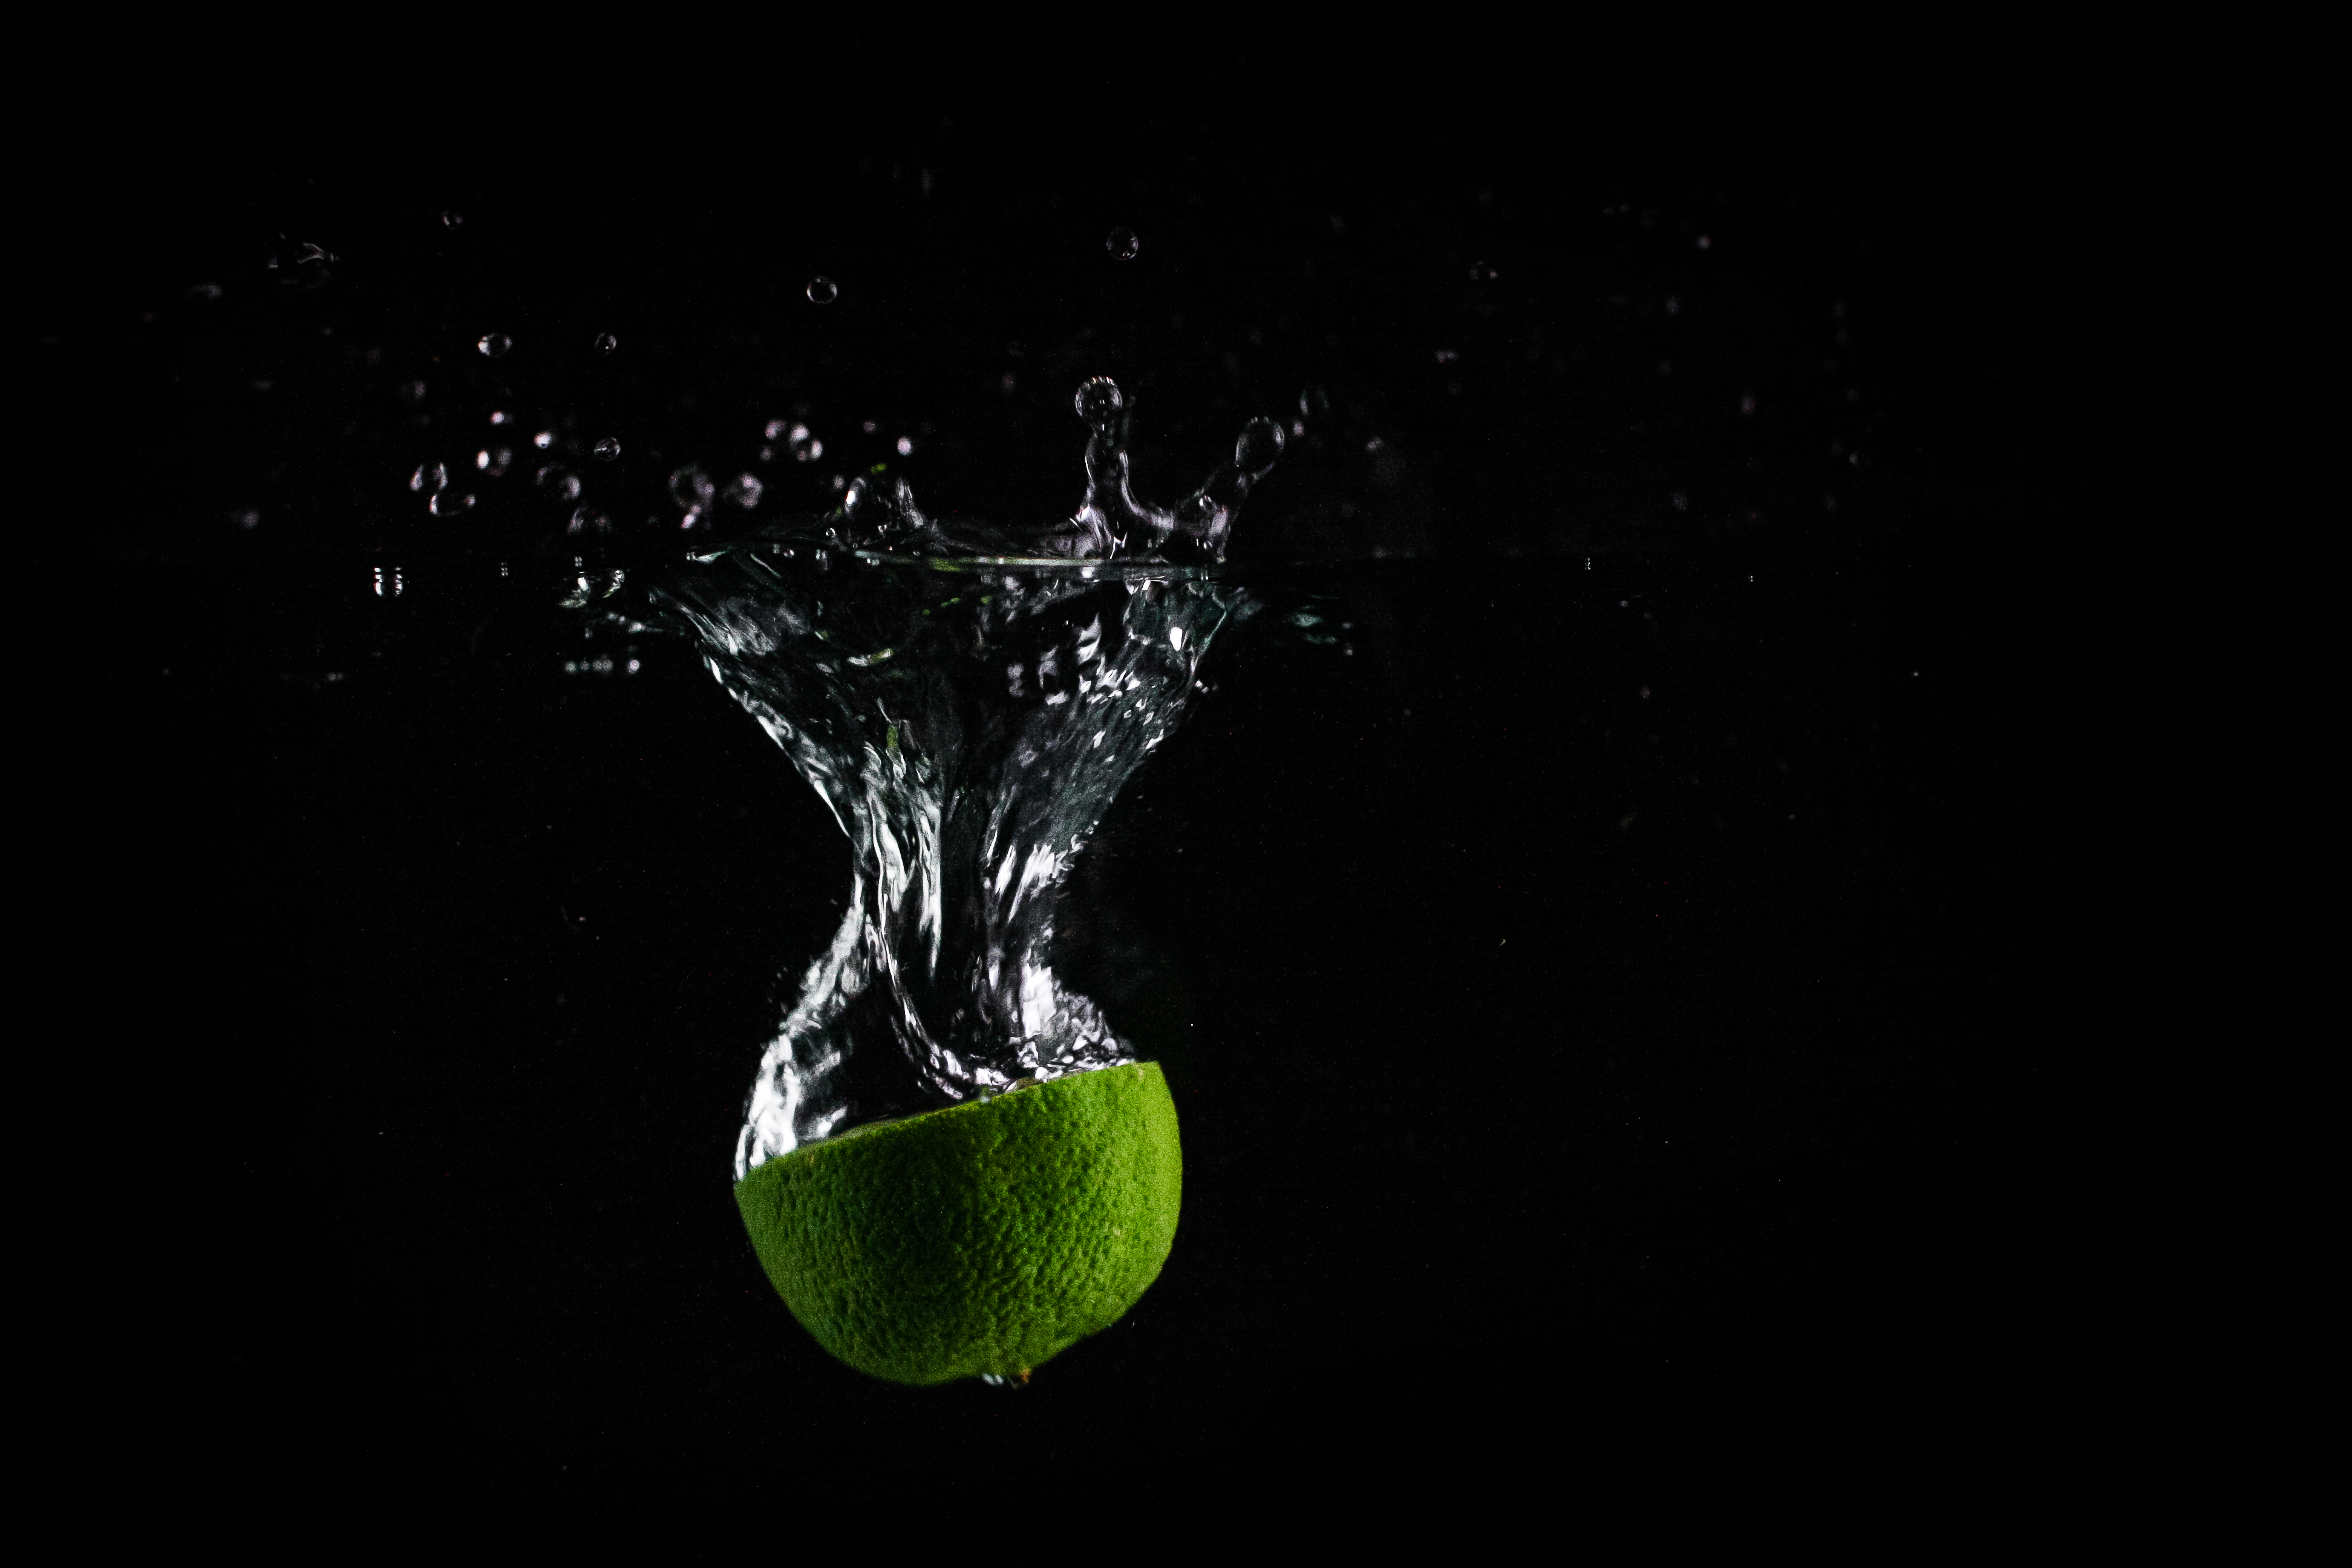 lime-in-water-with-black-background-picjumbo-com